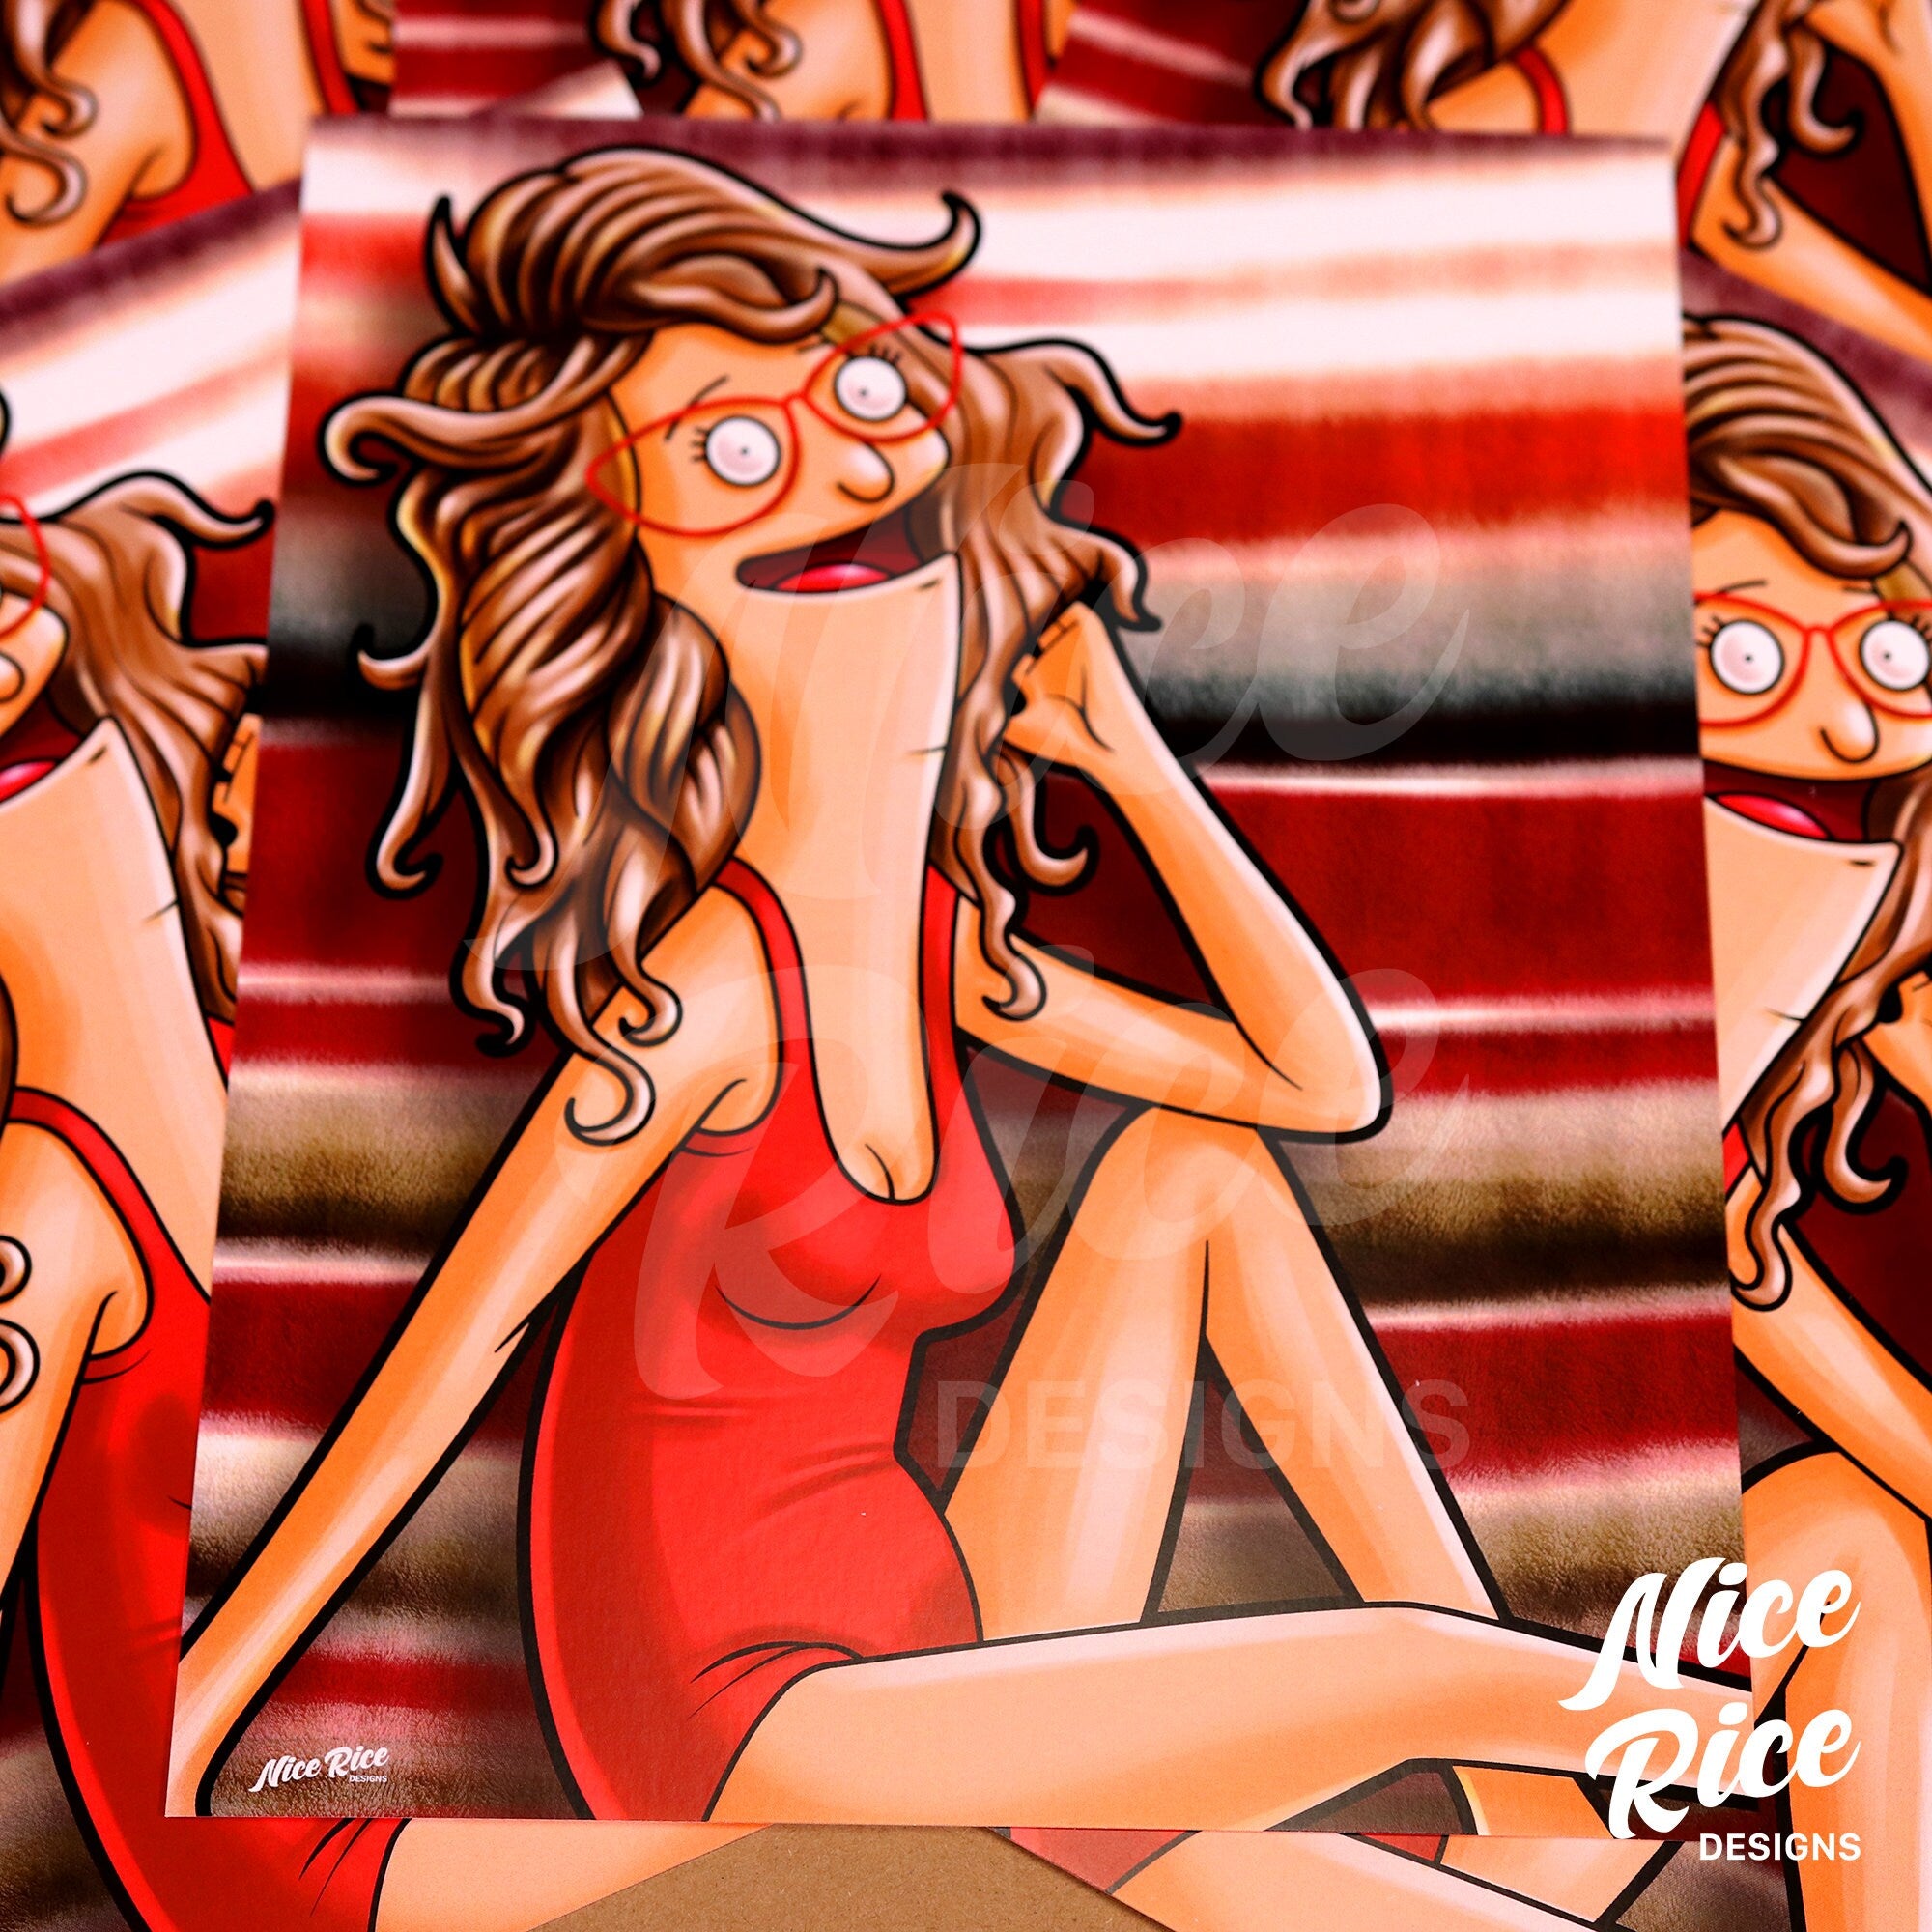 The Red Swimsuit Print by Nice Rice Designs